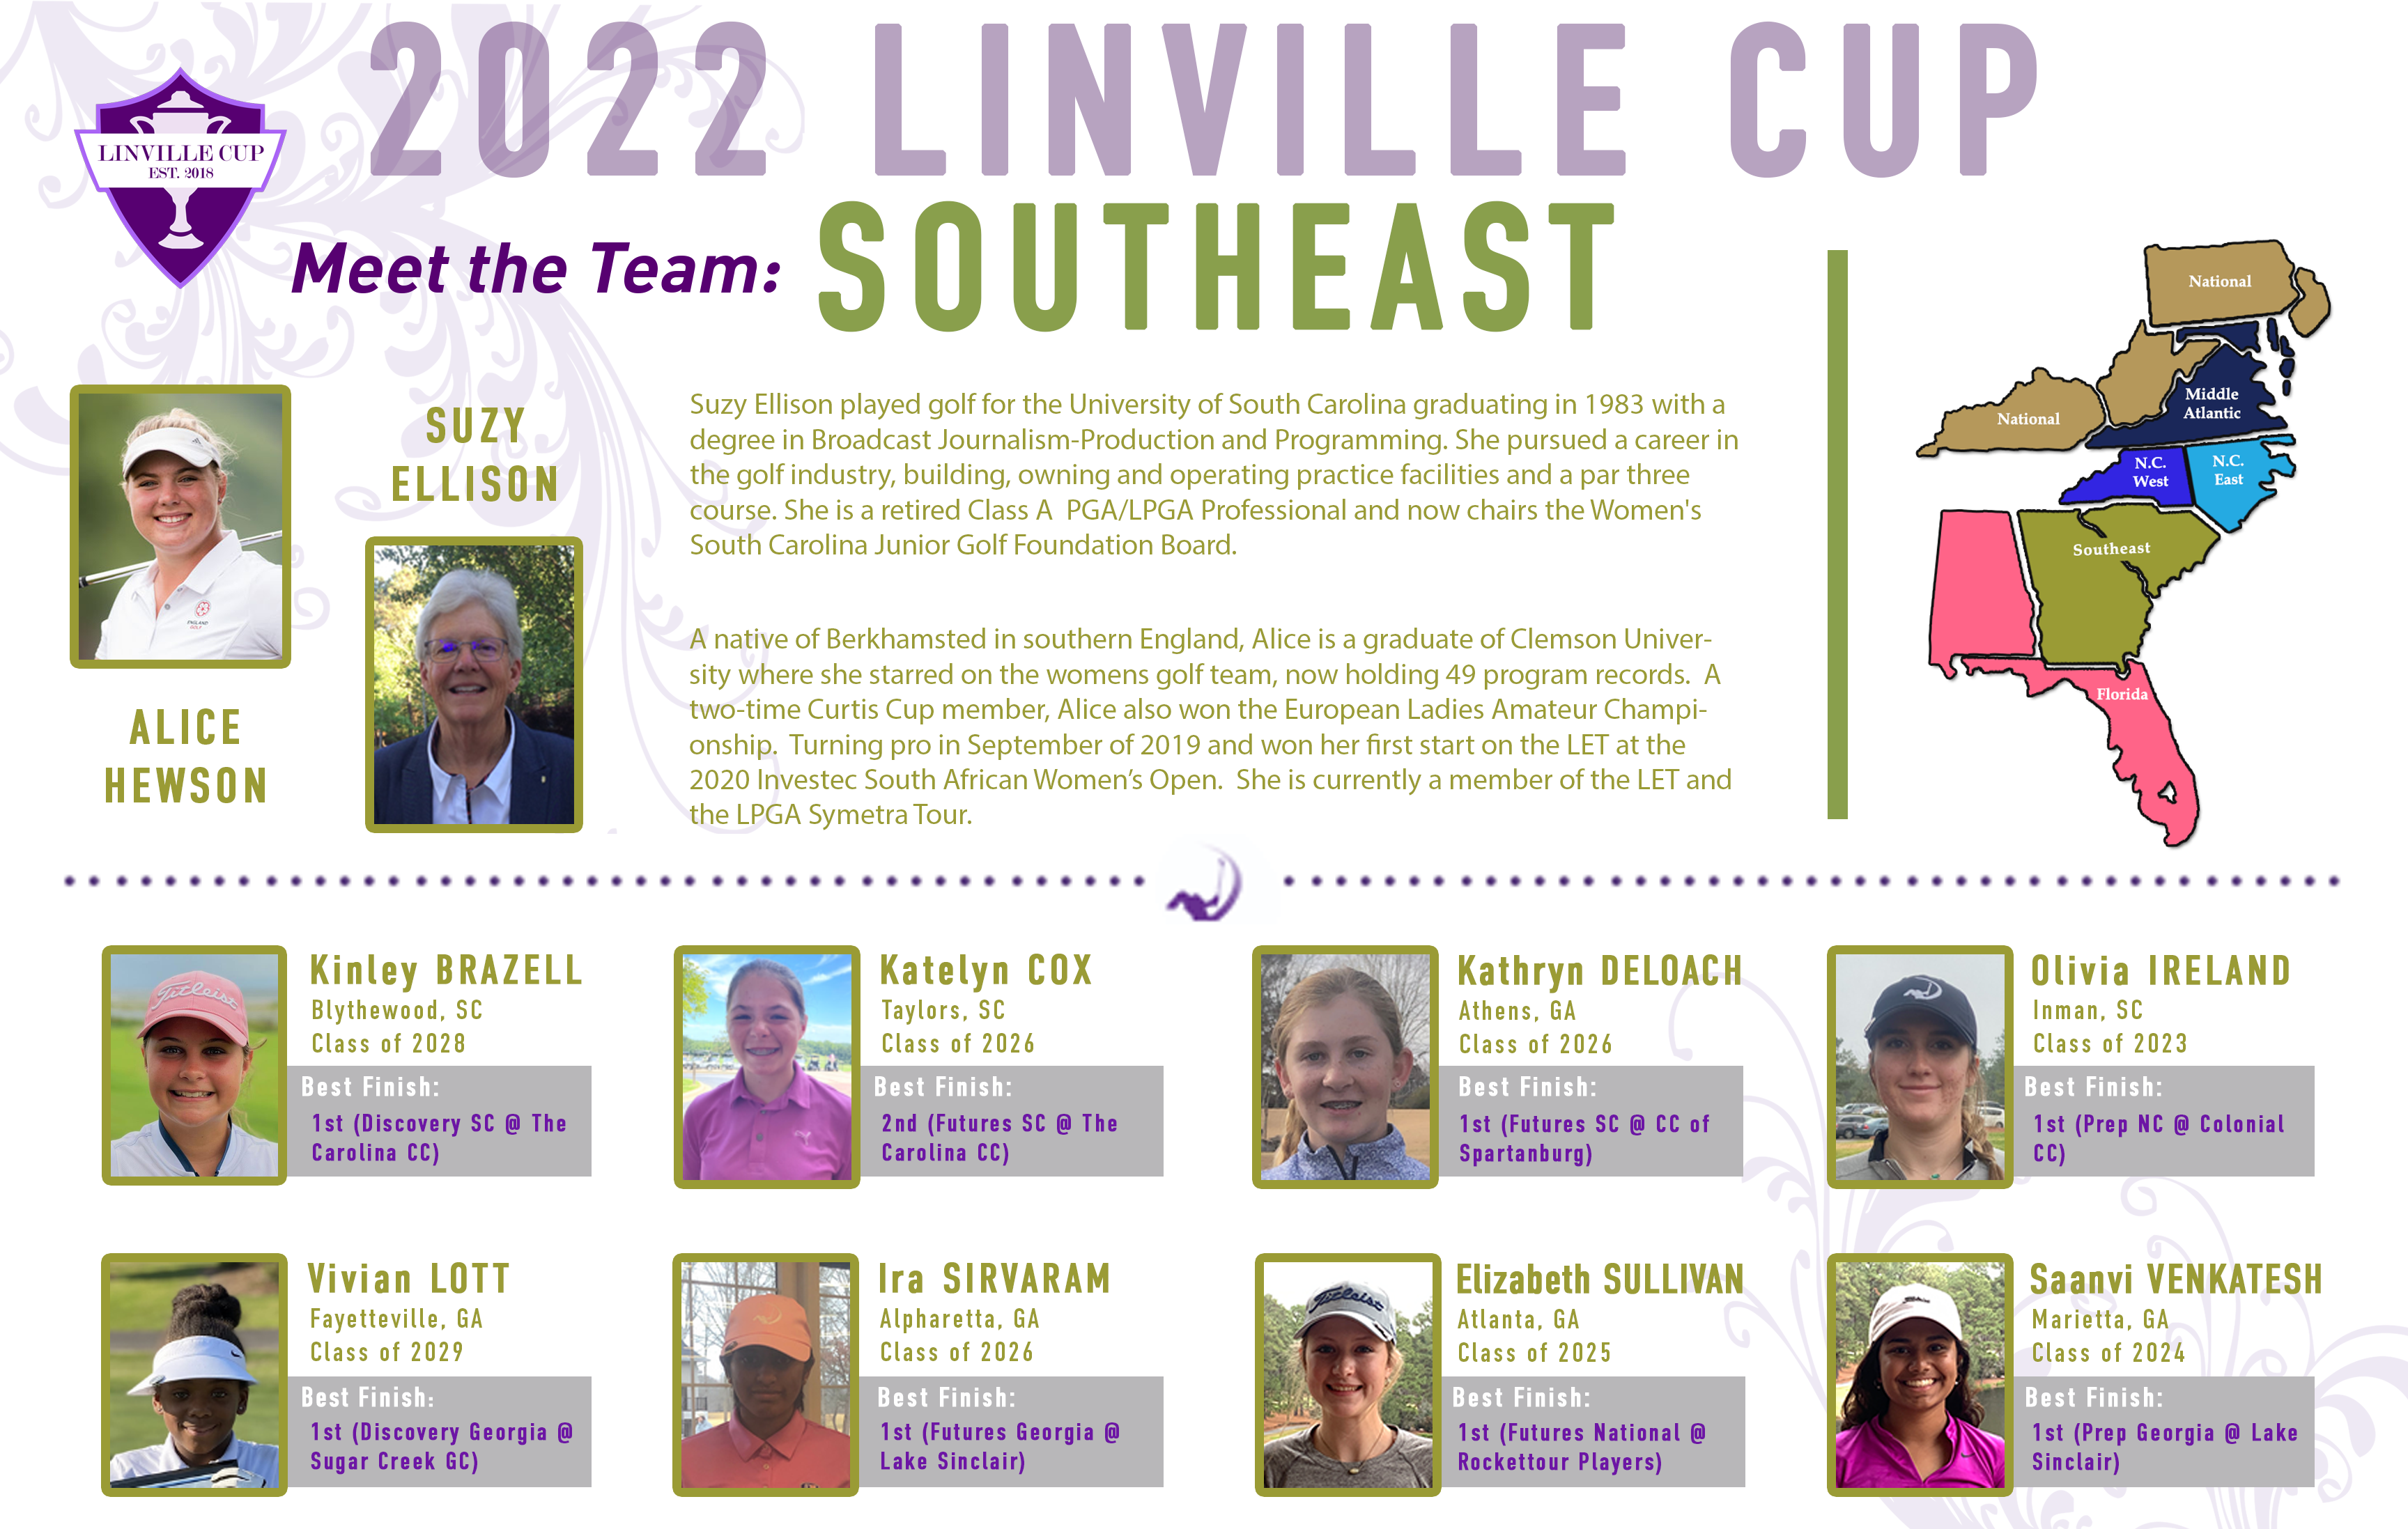 Linville Cup 2022: Team Southeast Preview